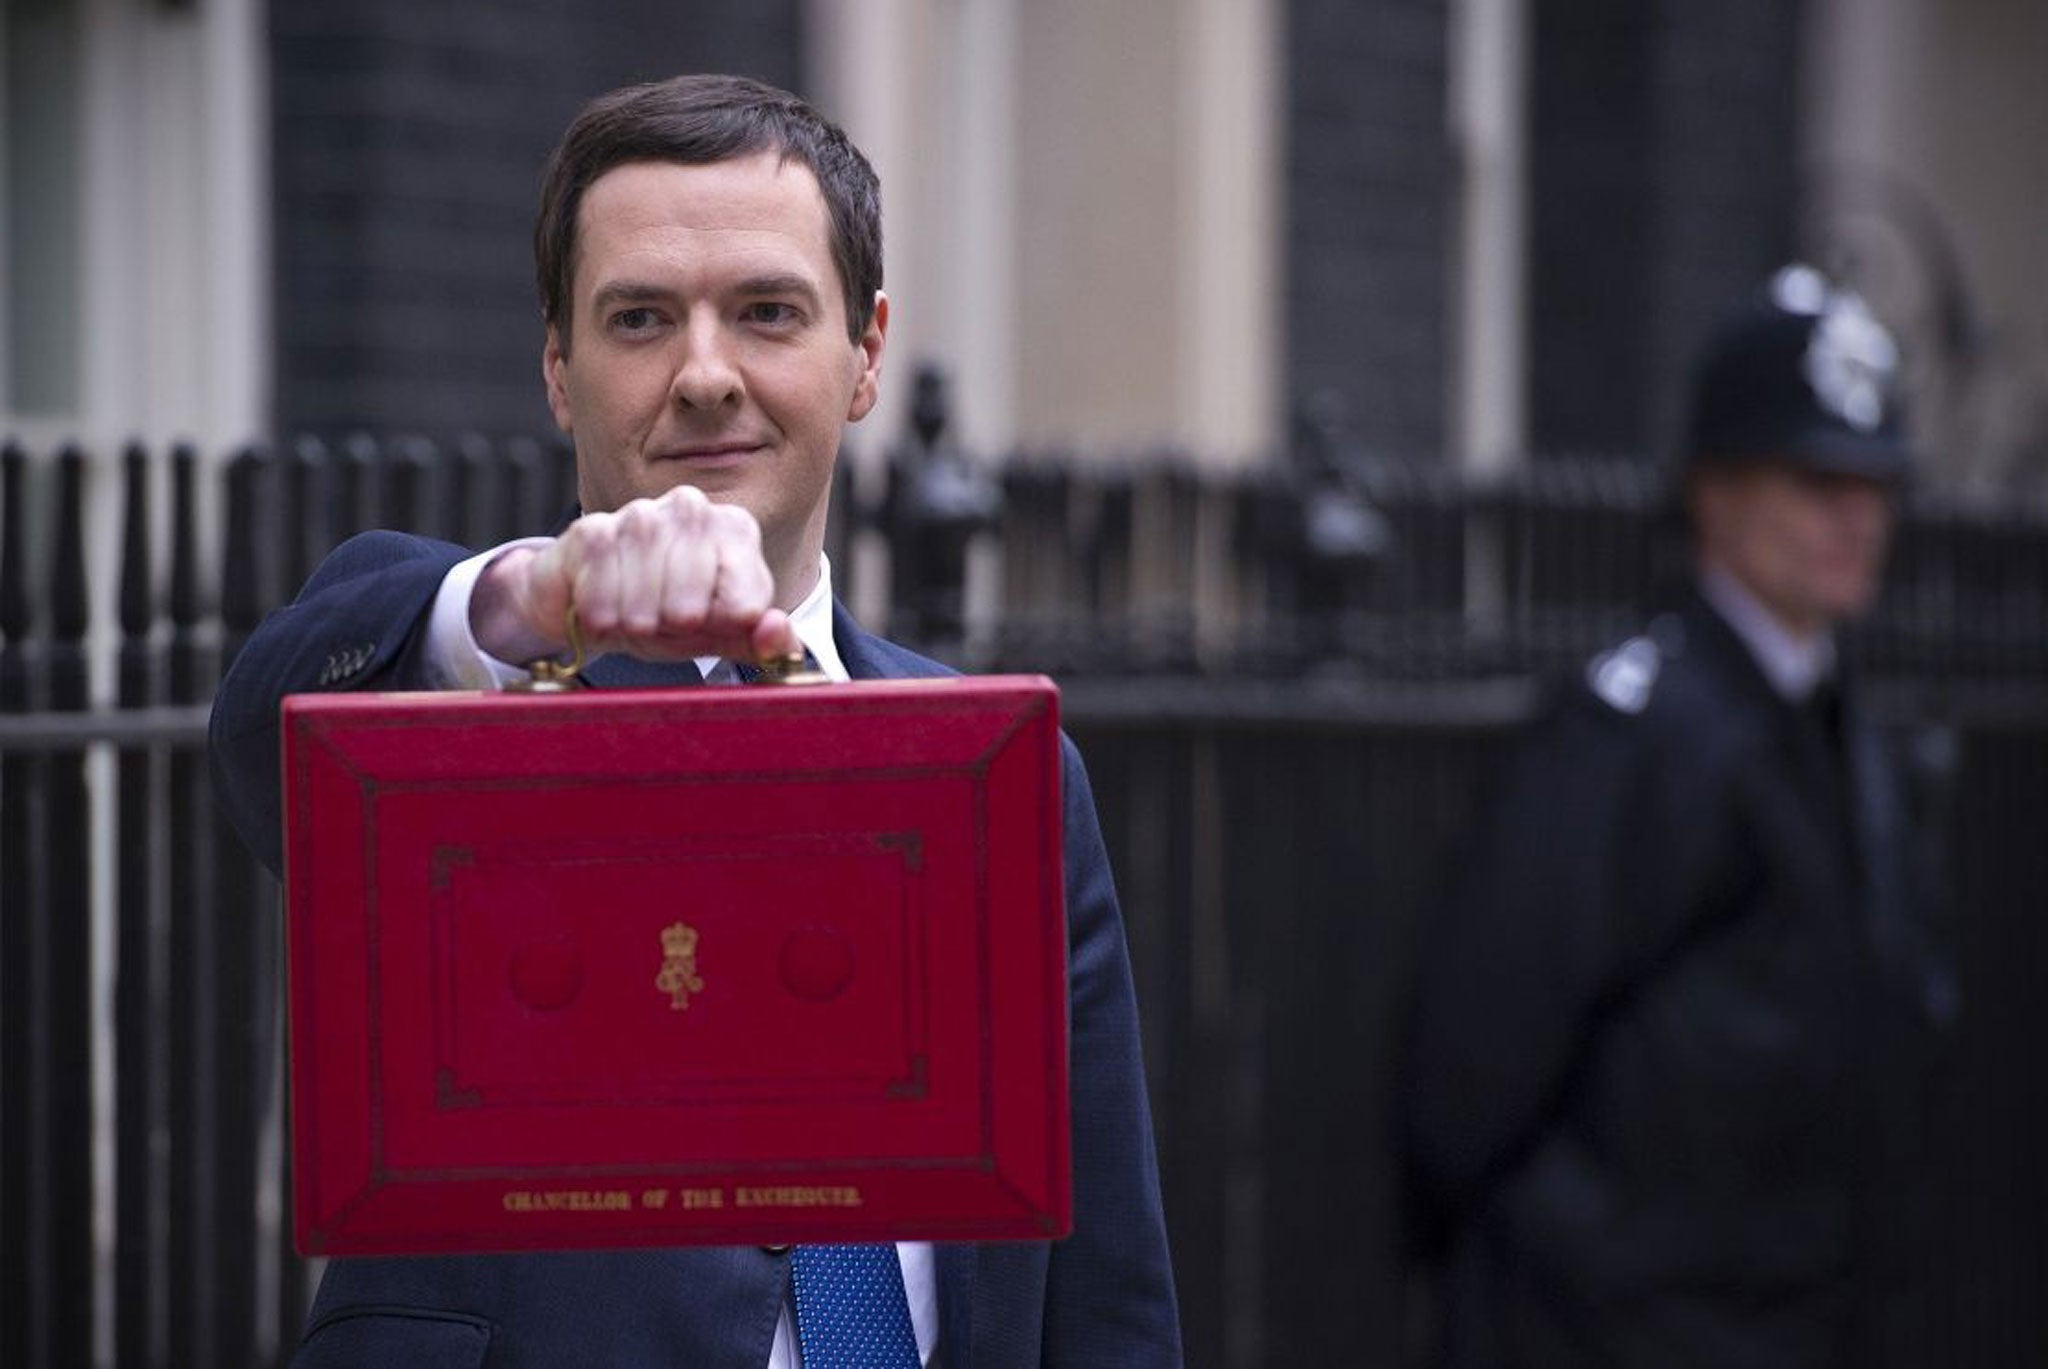 The new dawn heralded by George Osborne has yet to rise